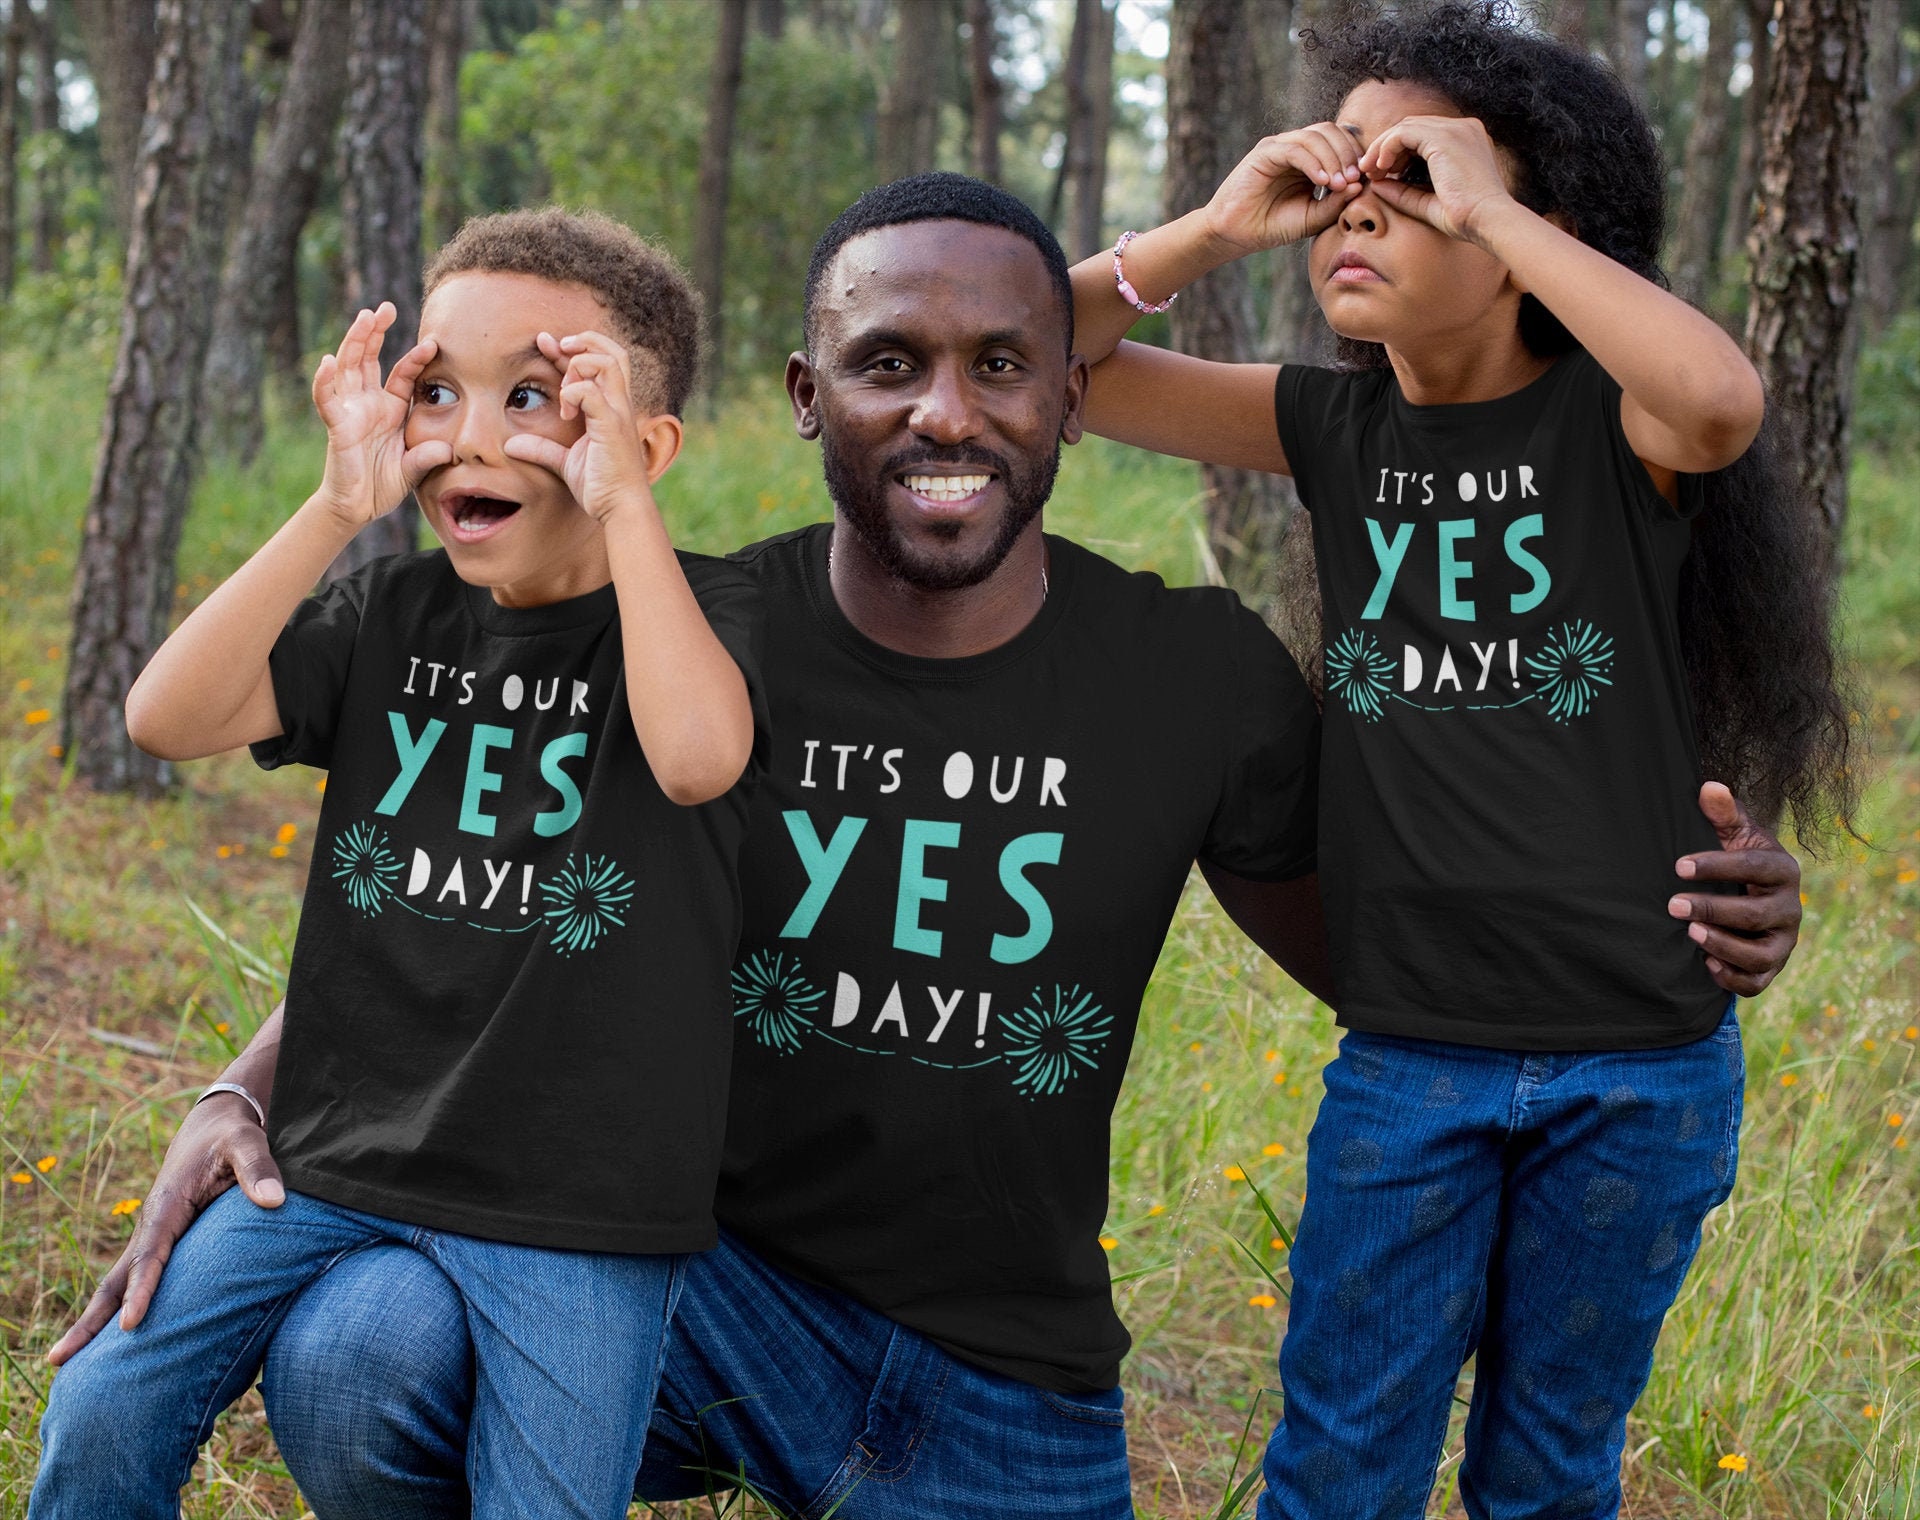 It's OUR YES DAY Youth Tee Group Shirt Yes Day Gift for Kid Family Fun Day Tee Matching Family T-Shirts Family Movie T-Shirt